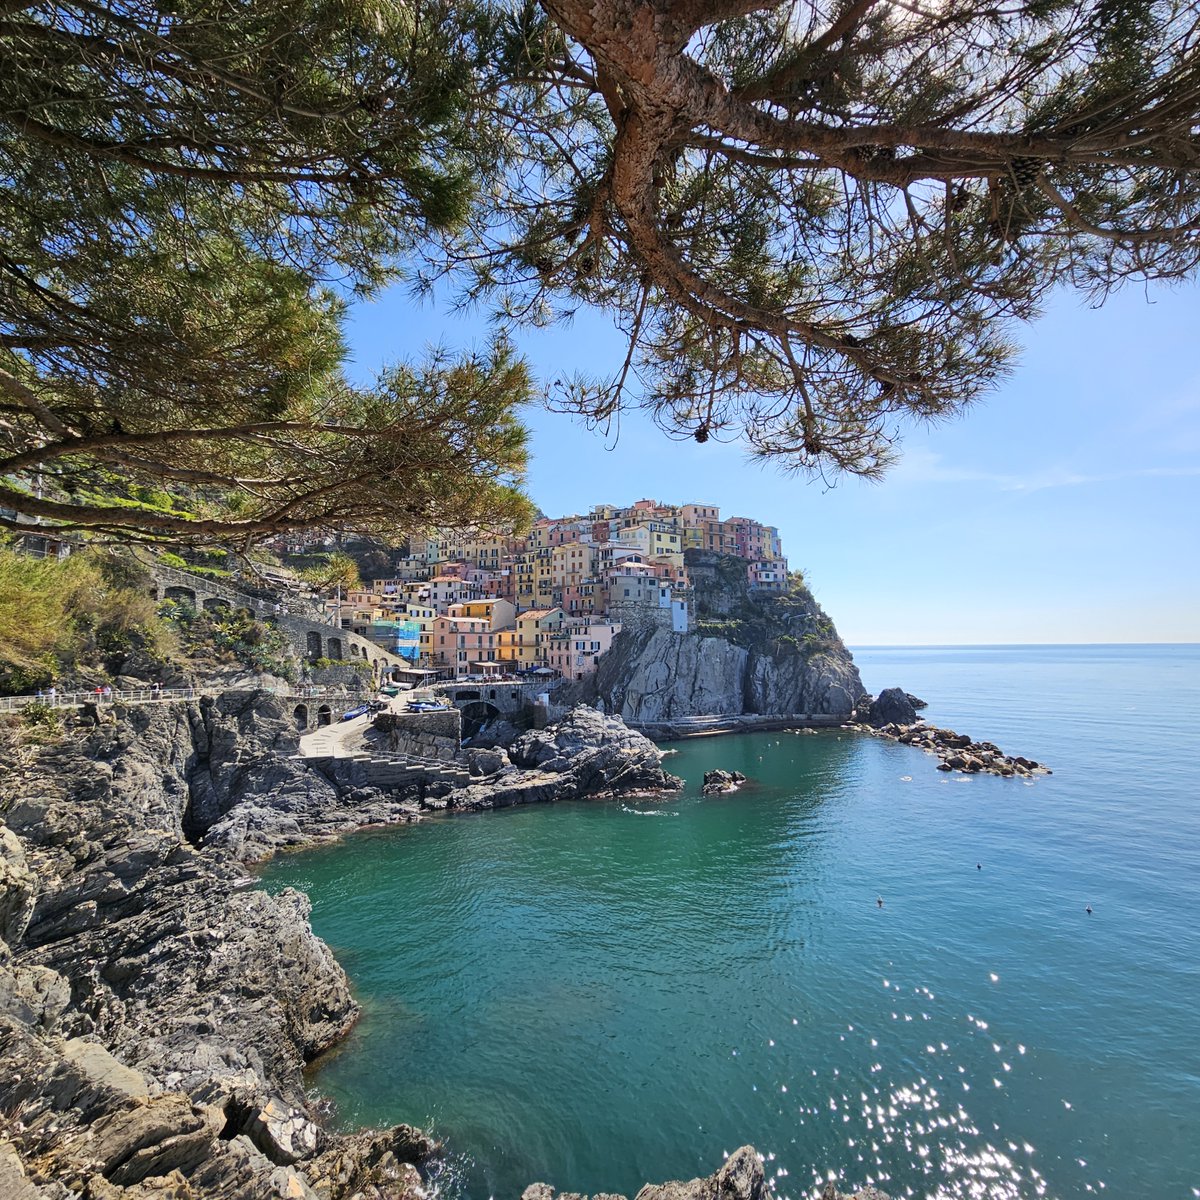 I recently returned from Italy. This is a shot I took looking out at Manarola, one of five villages in Cinque Terre on the Ligurian Sea.